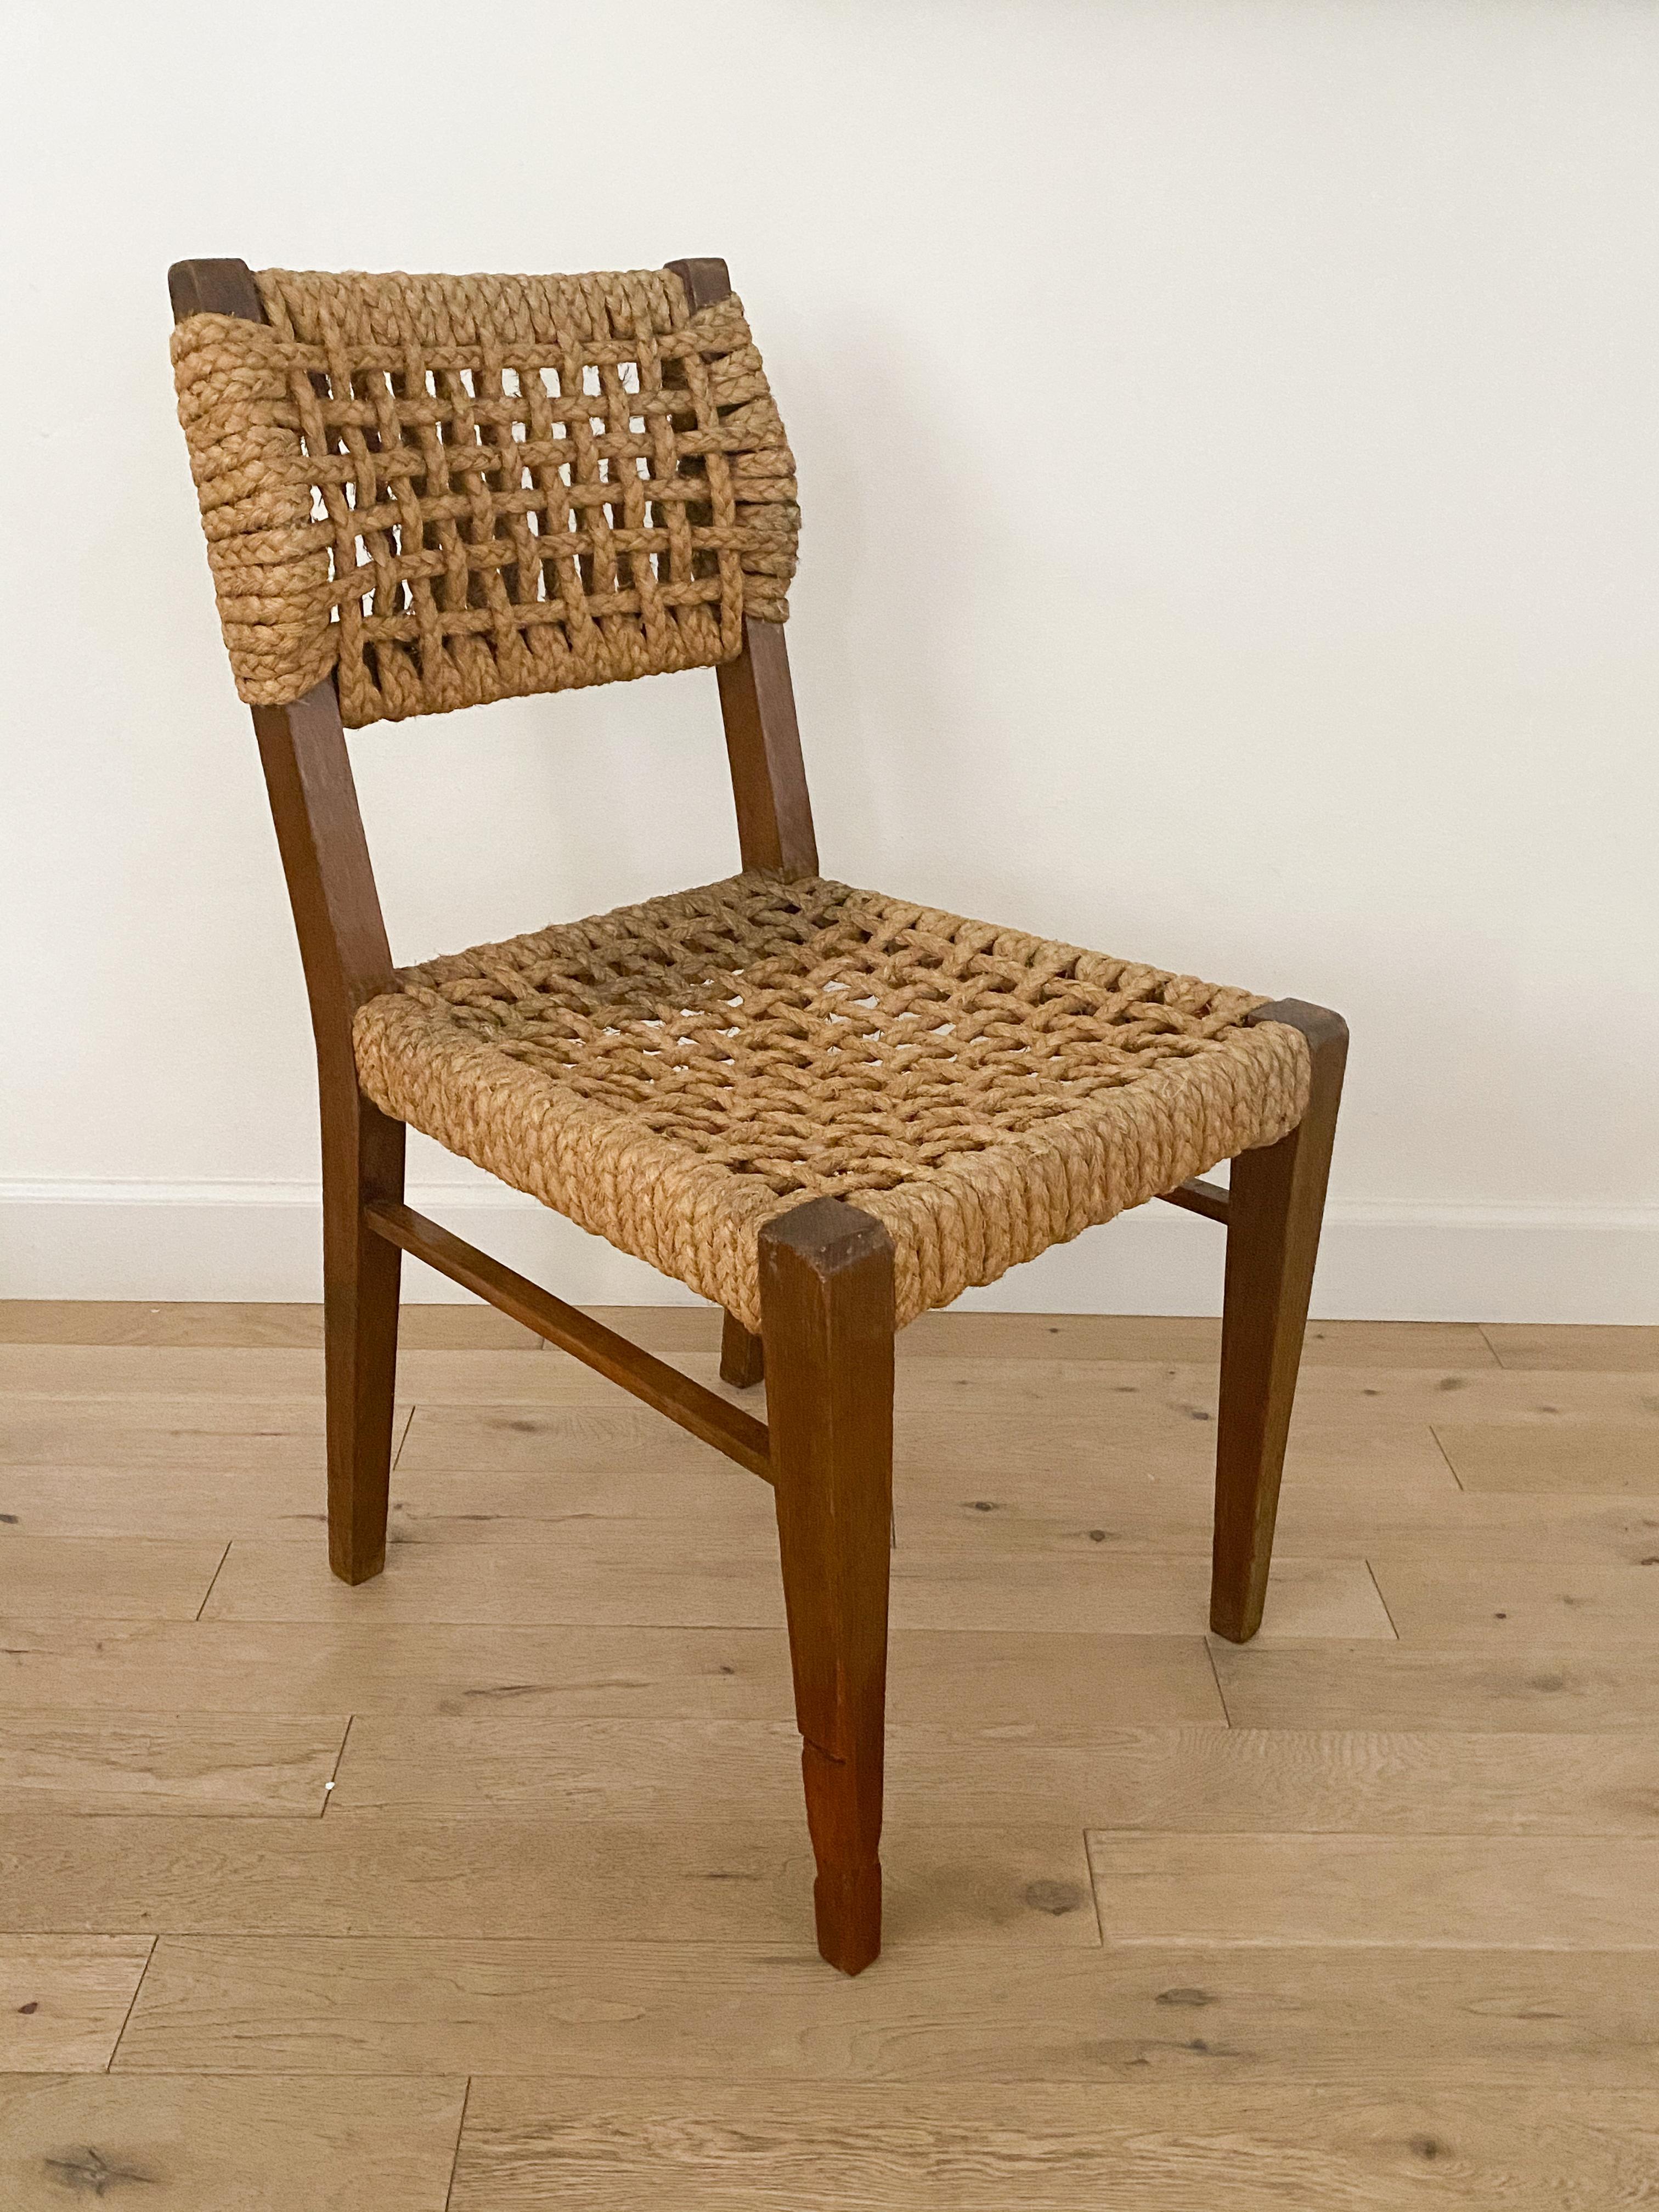 Vintage Adrien Audoux & Frida Minet chair from France, 1950s. All original wood and rope seat with nice patina and age. Beautiful statement chair showcasing a Classic design. Three available, sold individually. 